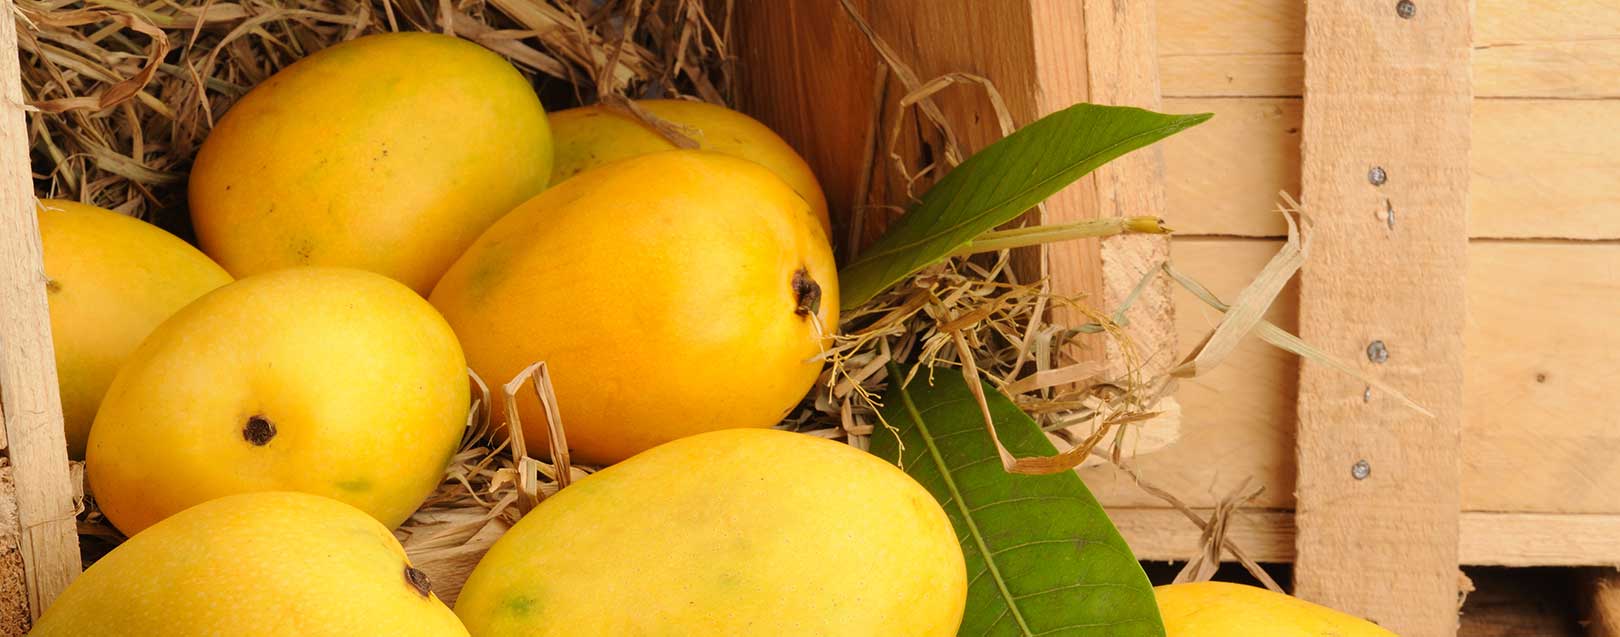 Mango exports to be down this year as production drop by 70% in UP